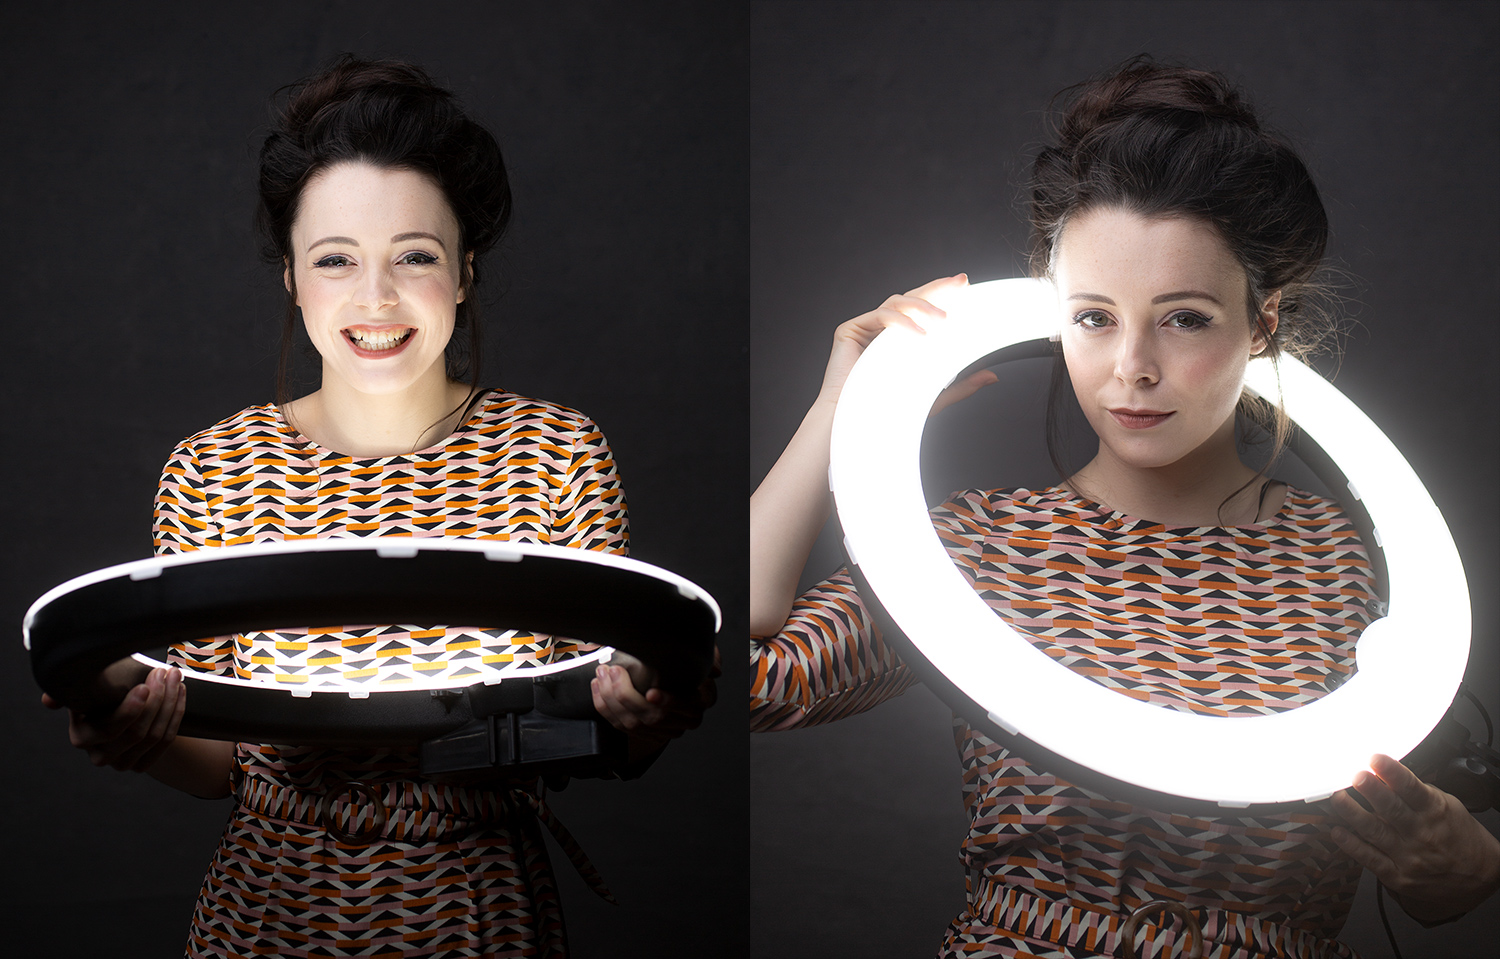 woman posing with ring lights as a prop